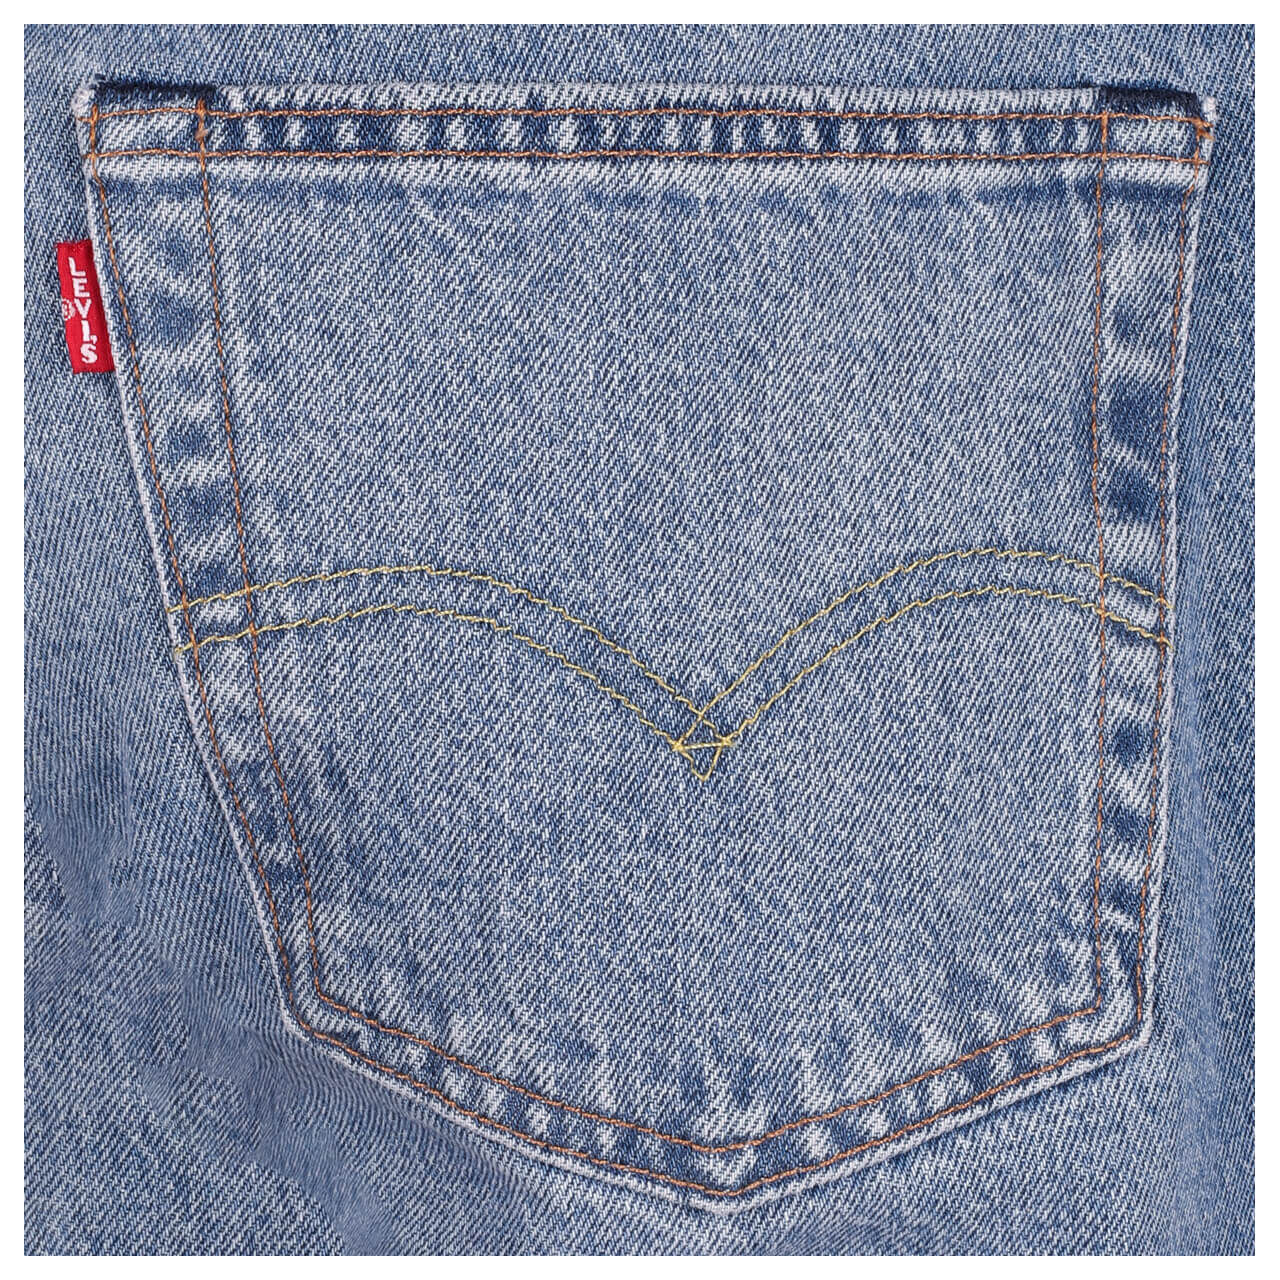 Levi's® 501 Herren Jeans classic blue washed